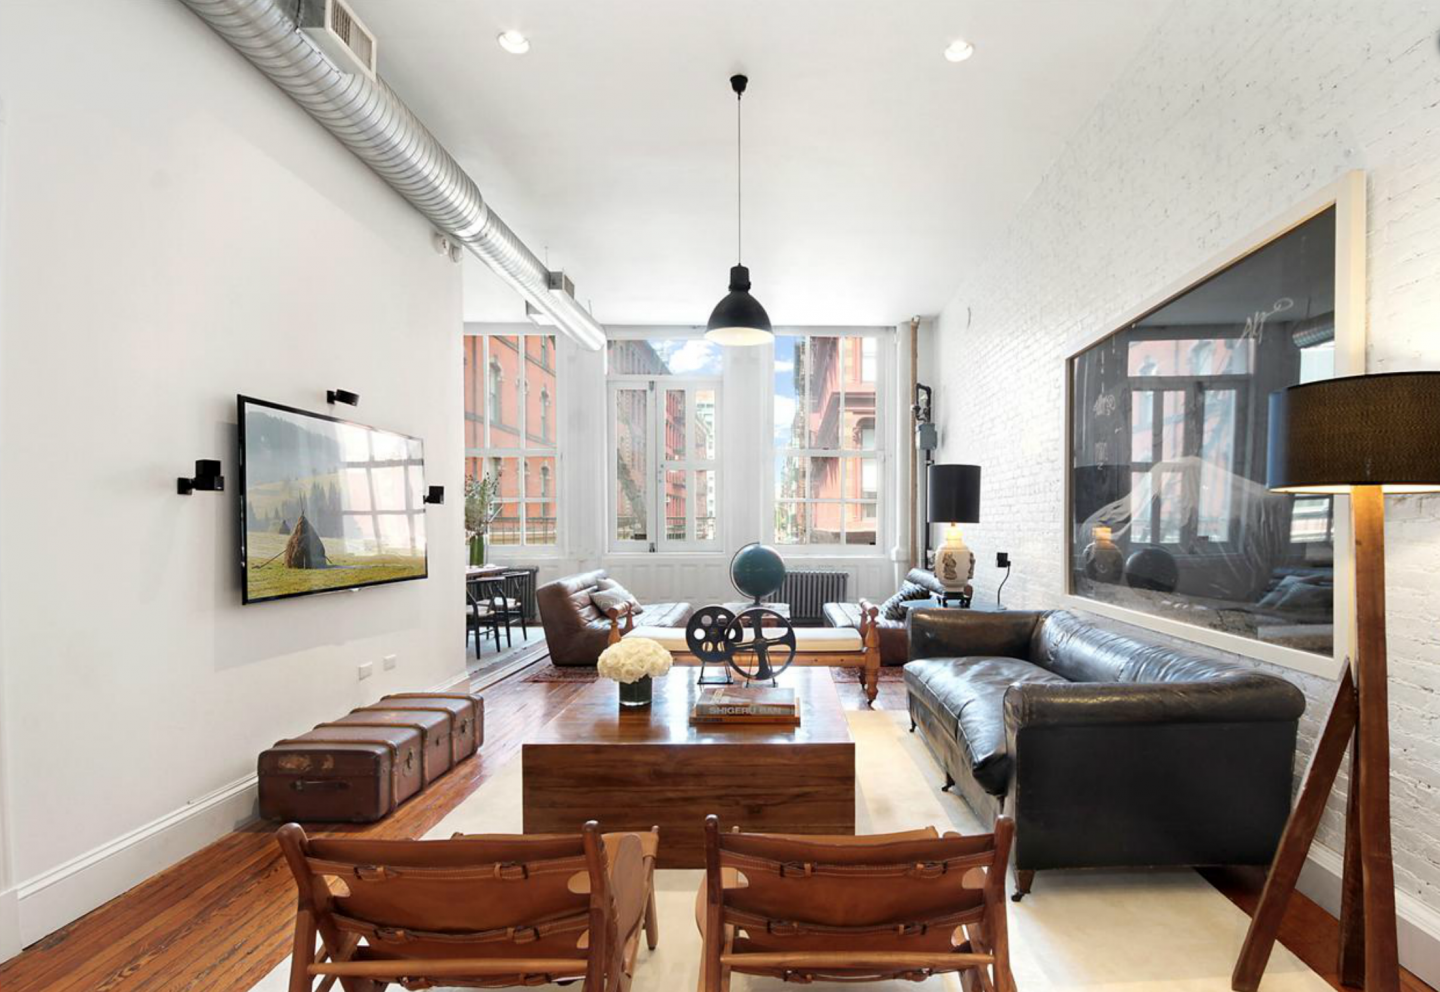 The 2,000-square-foot full-floor loft is on the market for $3.5 million, $300,000 less than its first listing.